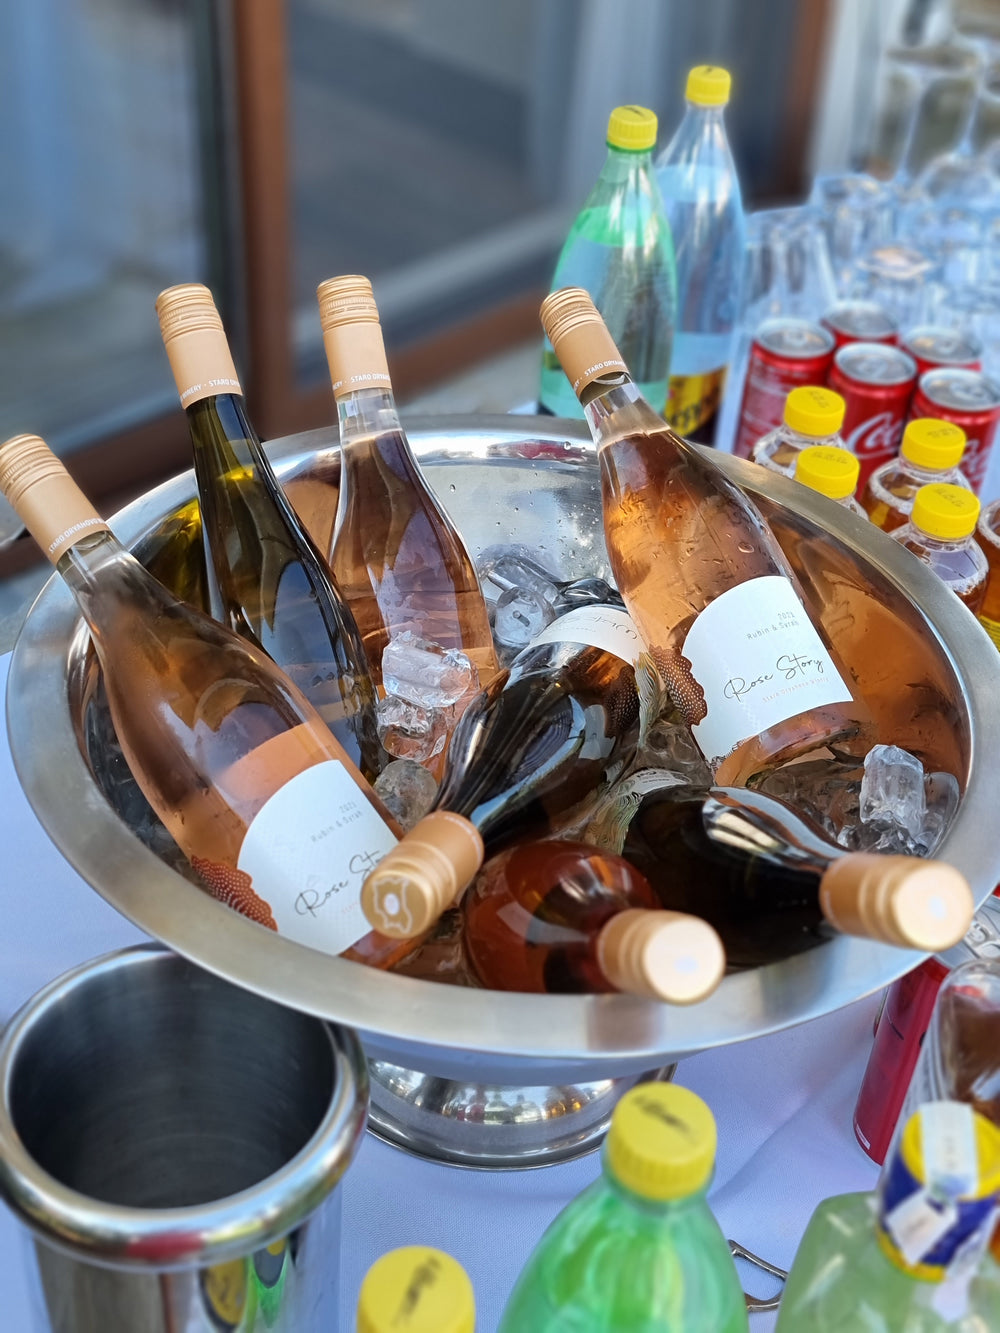 We will deliver you the wines for your EVENT!